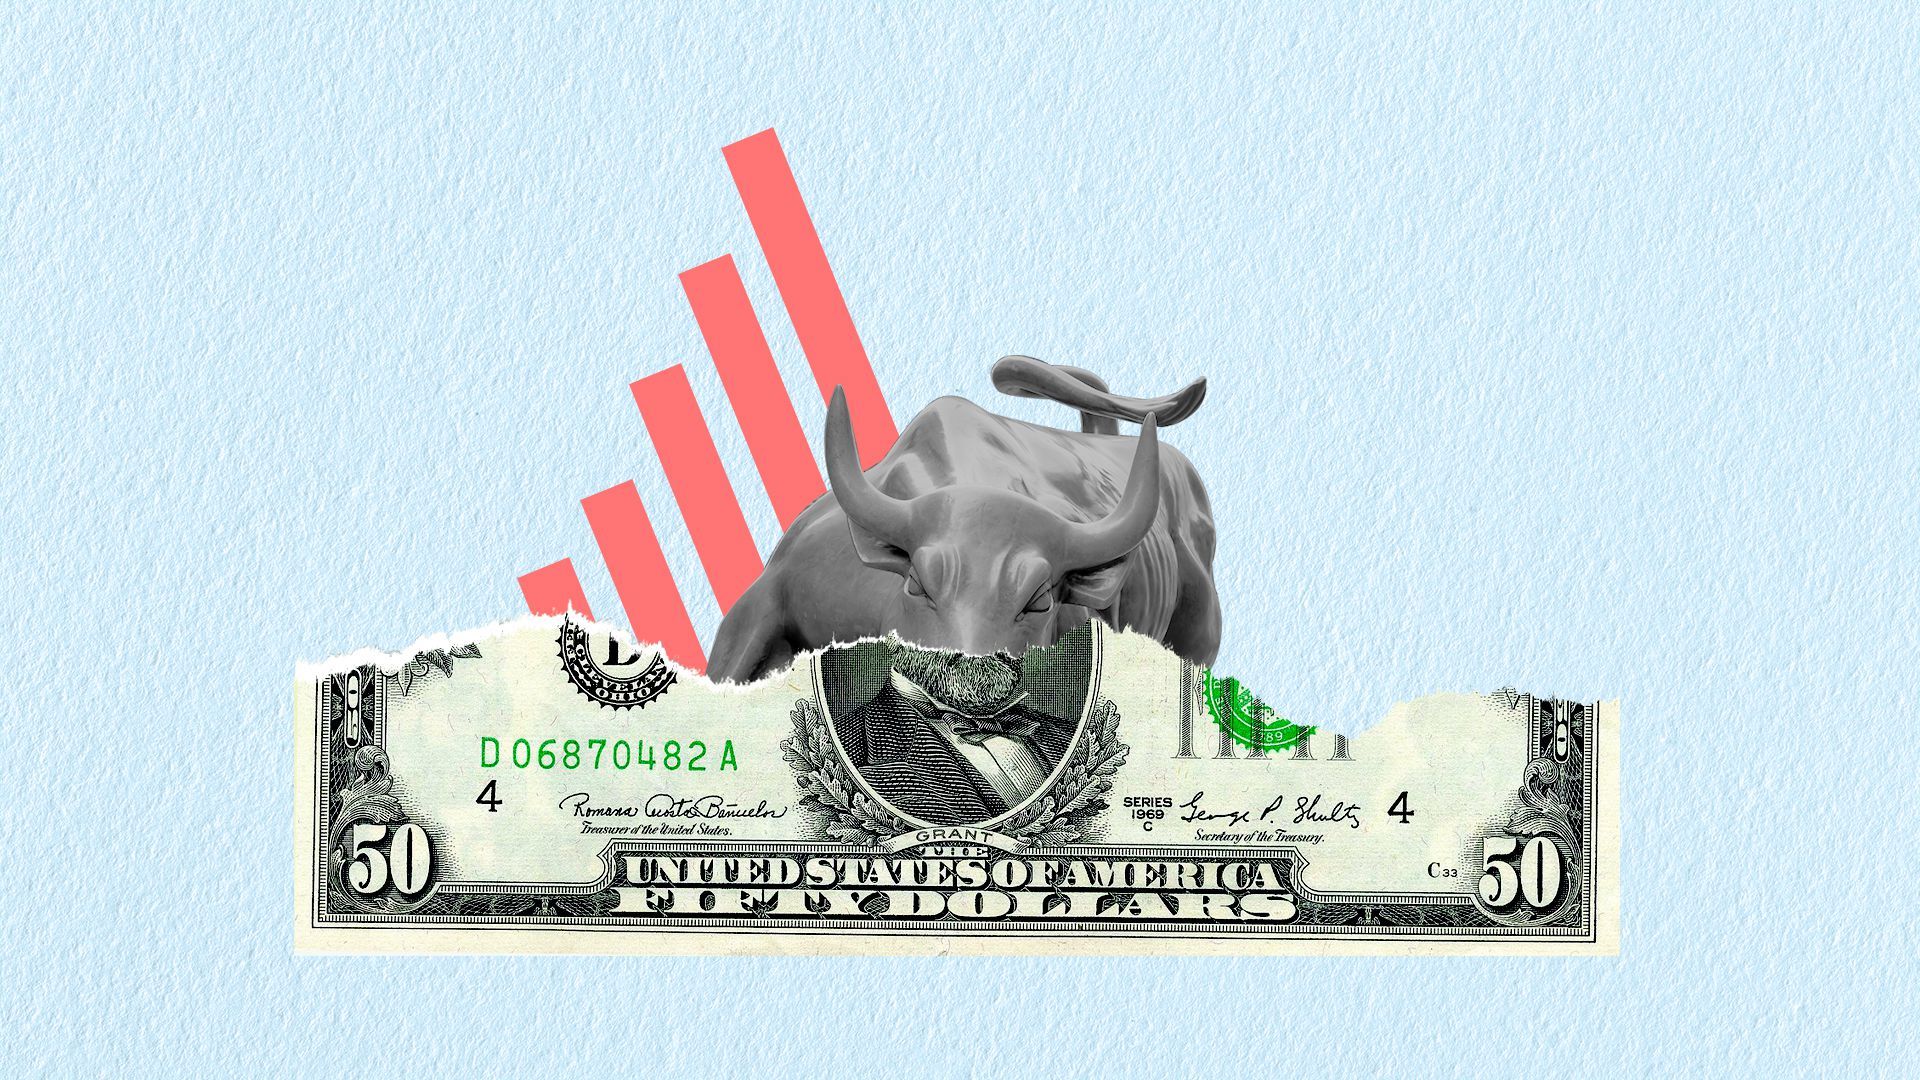 Illustration of a Bull behind a torn dollar bill, with upward trending bar lines in the background.